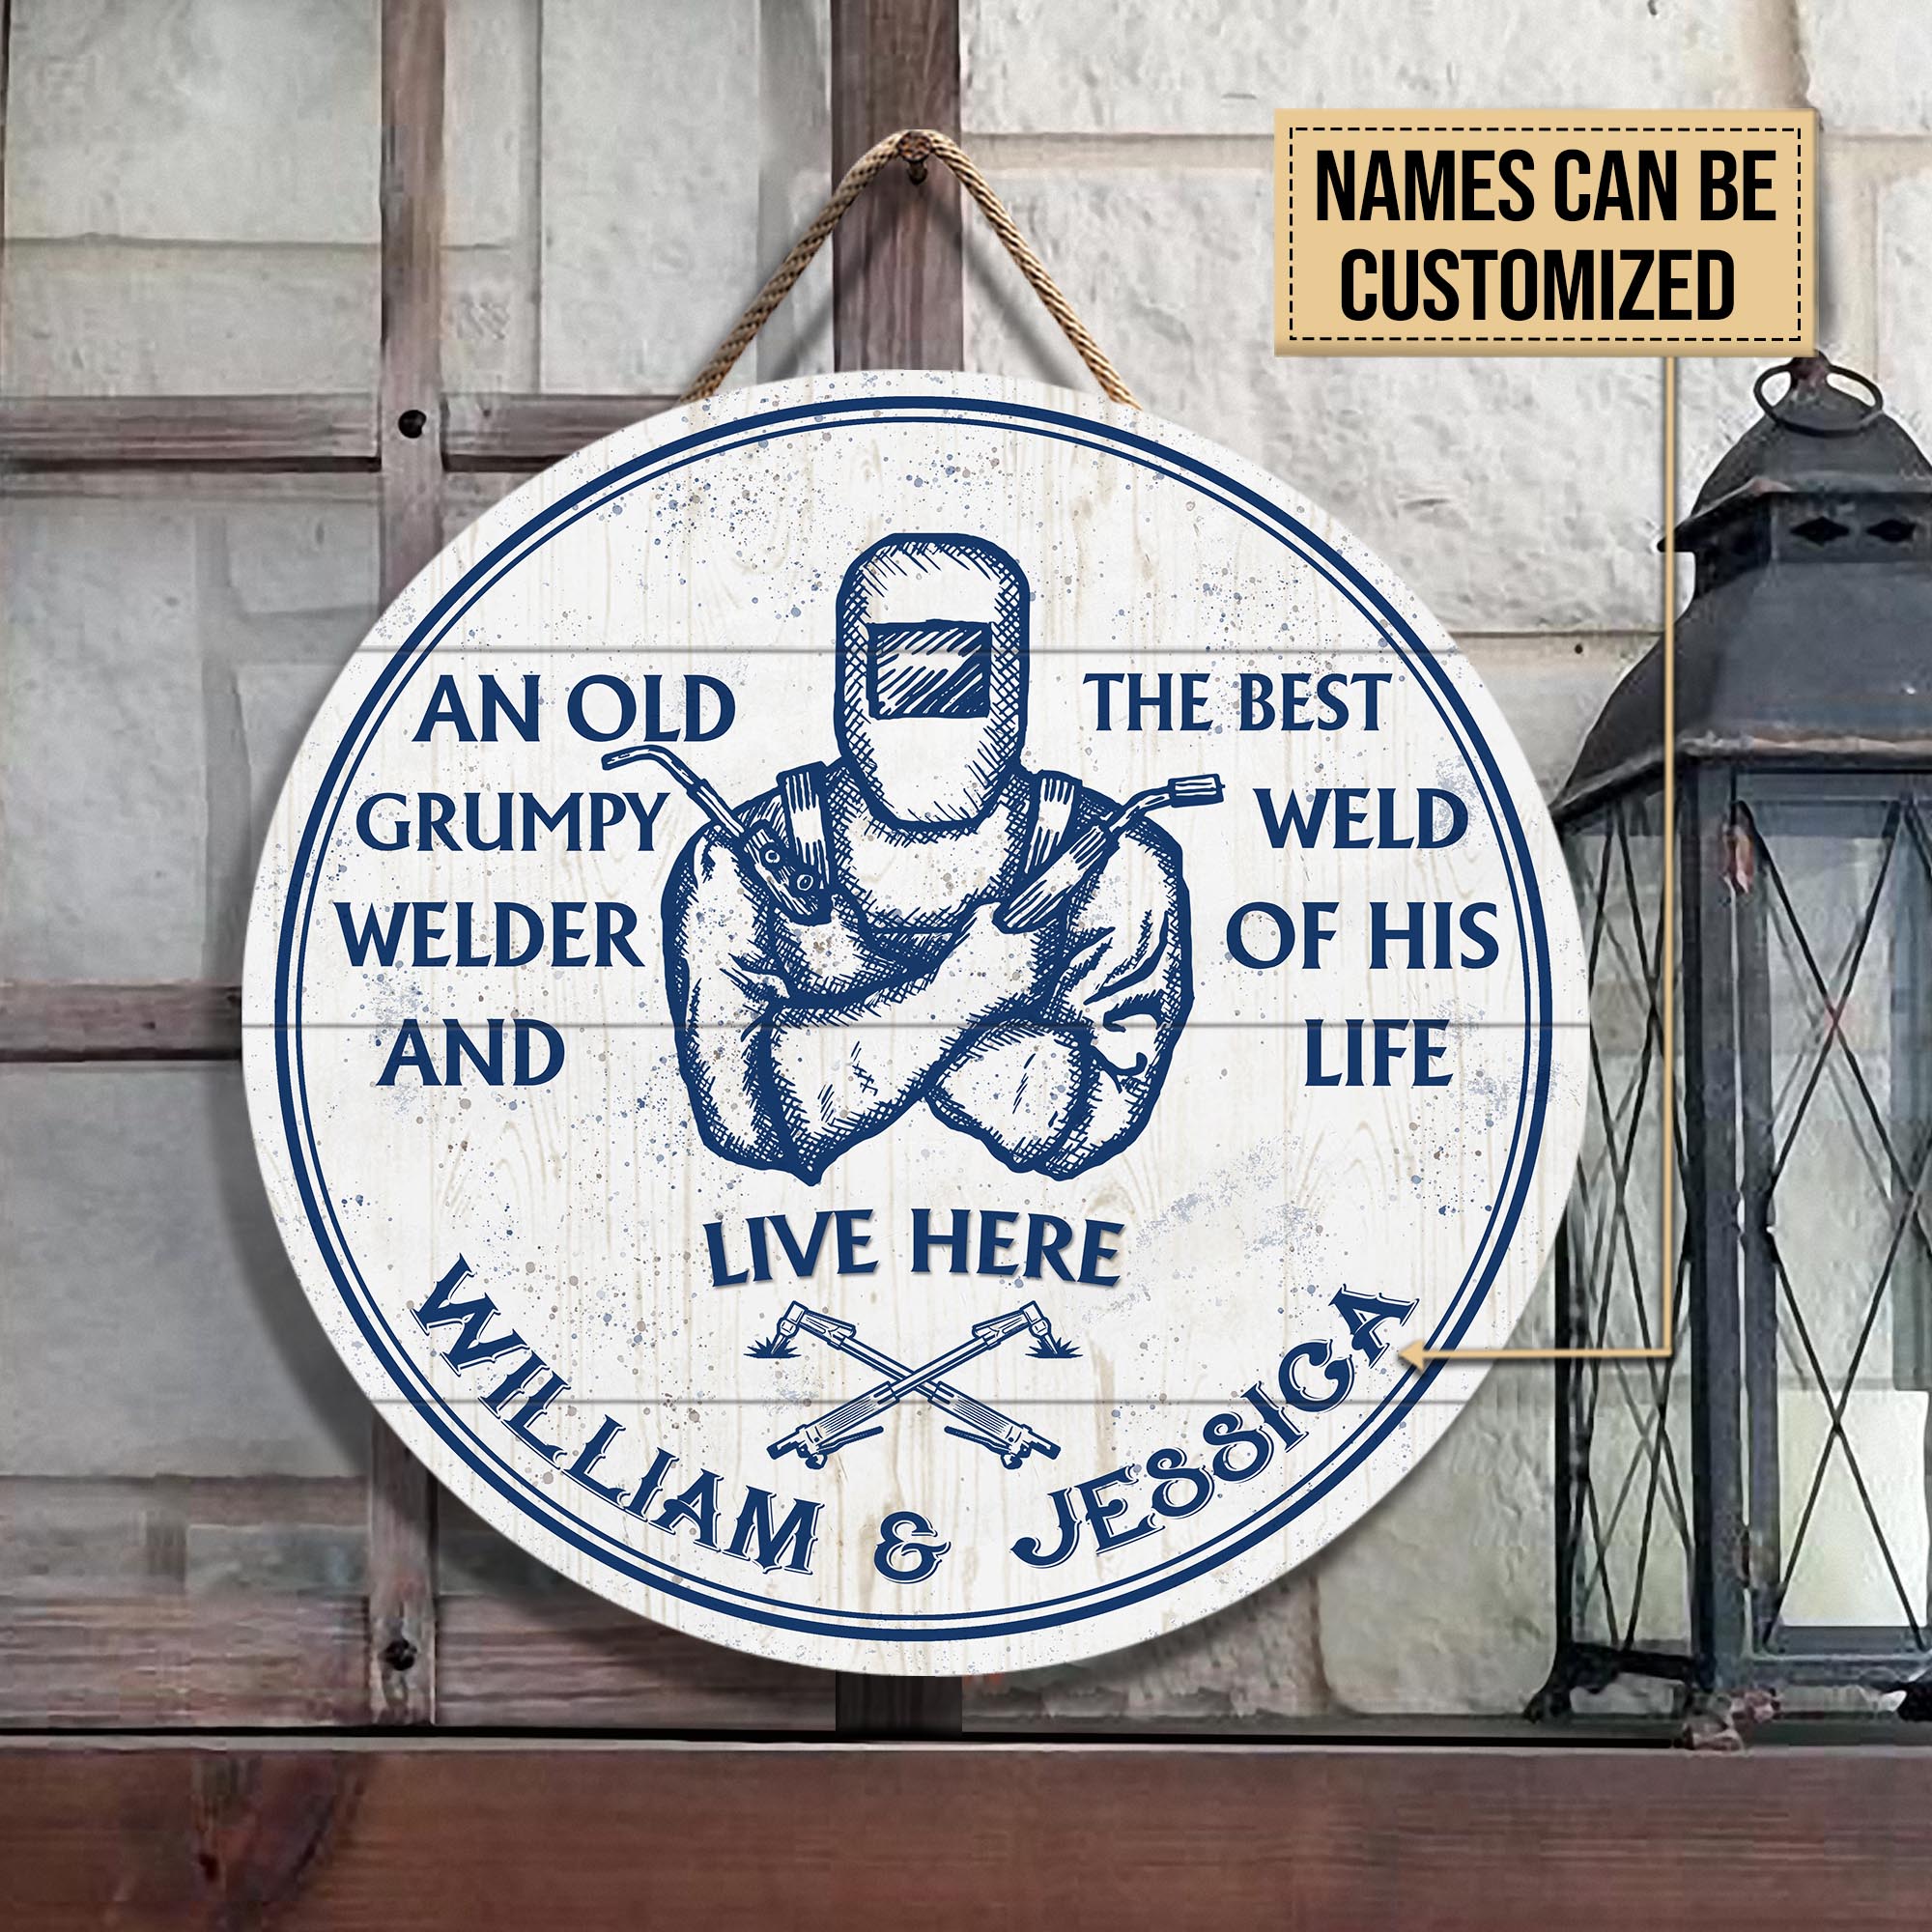 Personalized Welder Best Weld Of His Life Customized Wood Circle Sign